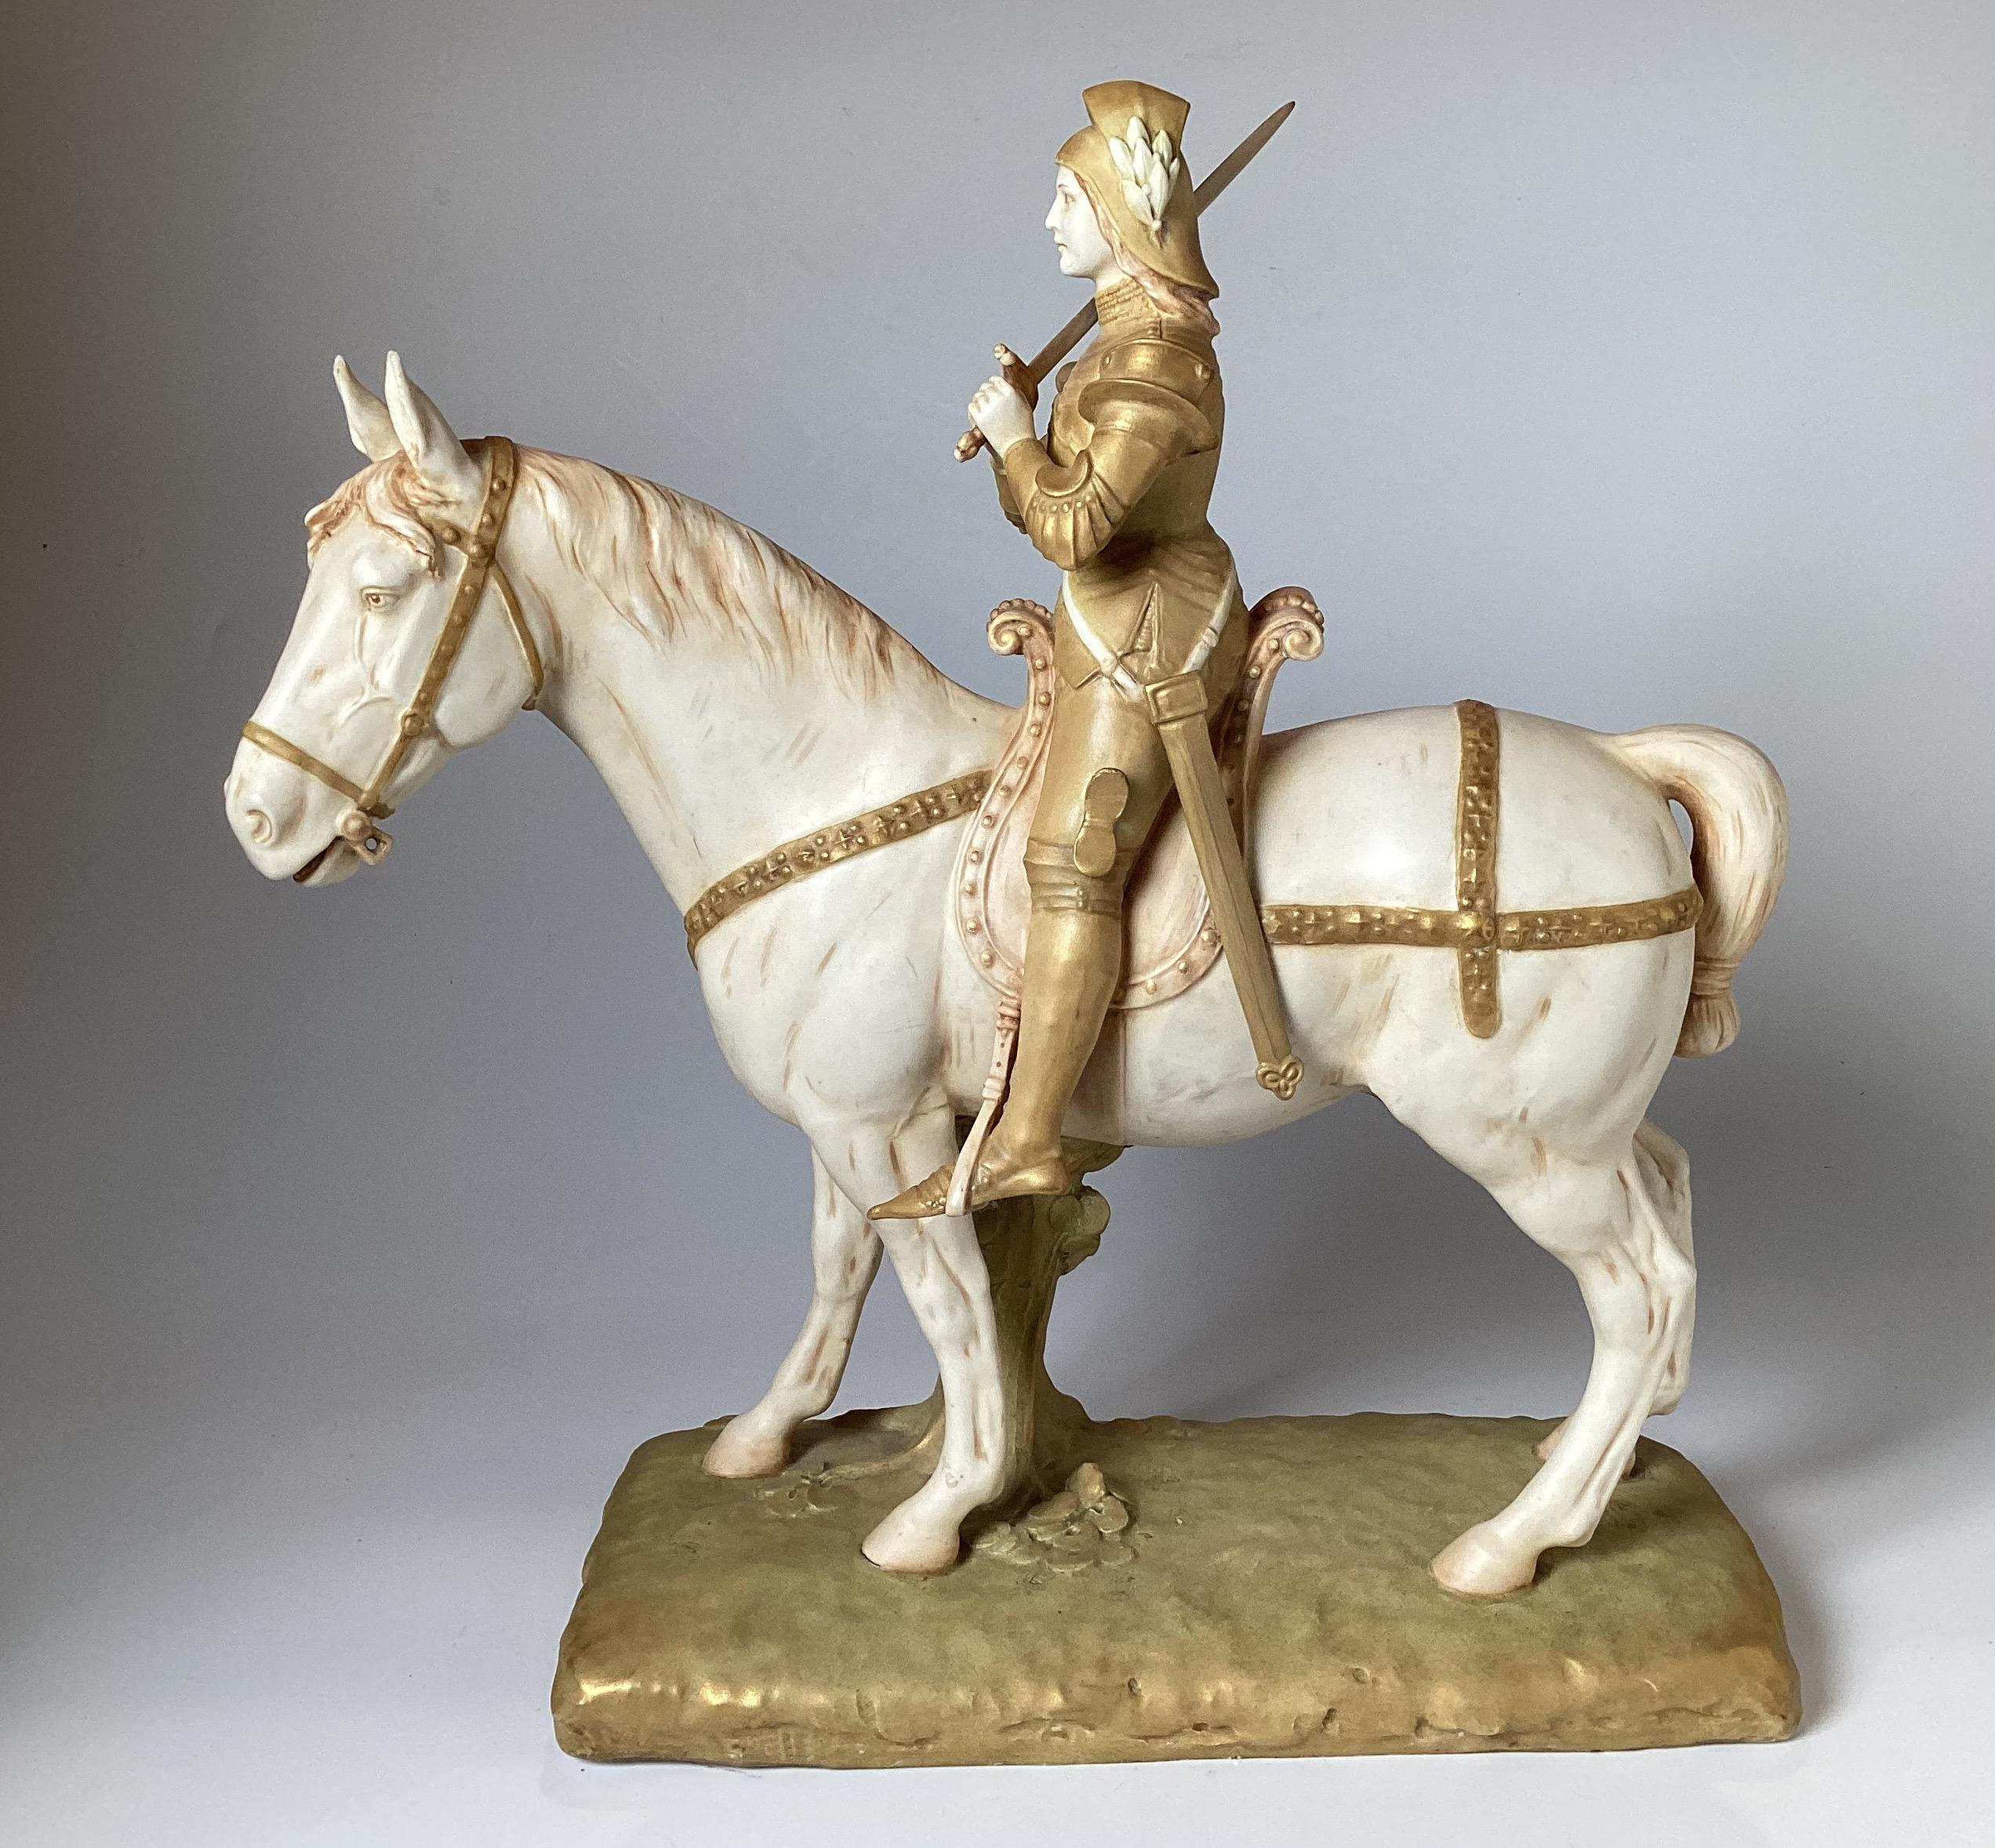 Stunning porcelain figure of Joan of Arc, made by Royal Vienna. The highly detailed sculpture with had painted details with a clear mark indication Royal Vienna, artist is Ernst Wahliss. 17 inches tall 17 inches wide, 6 deep.